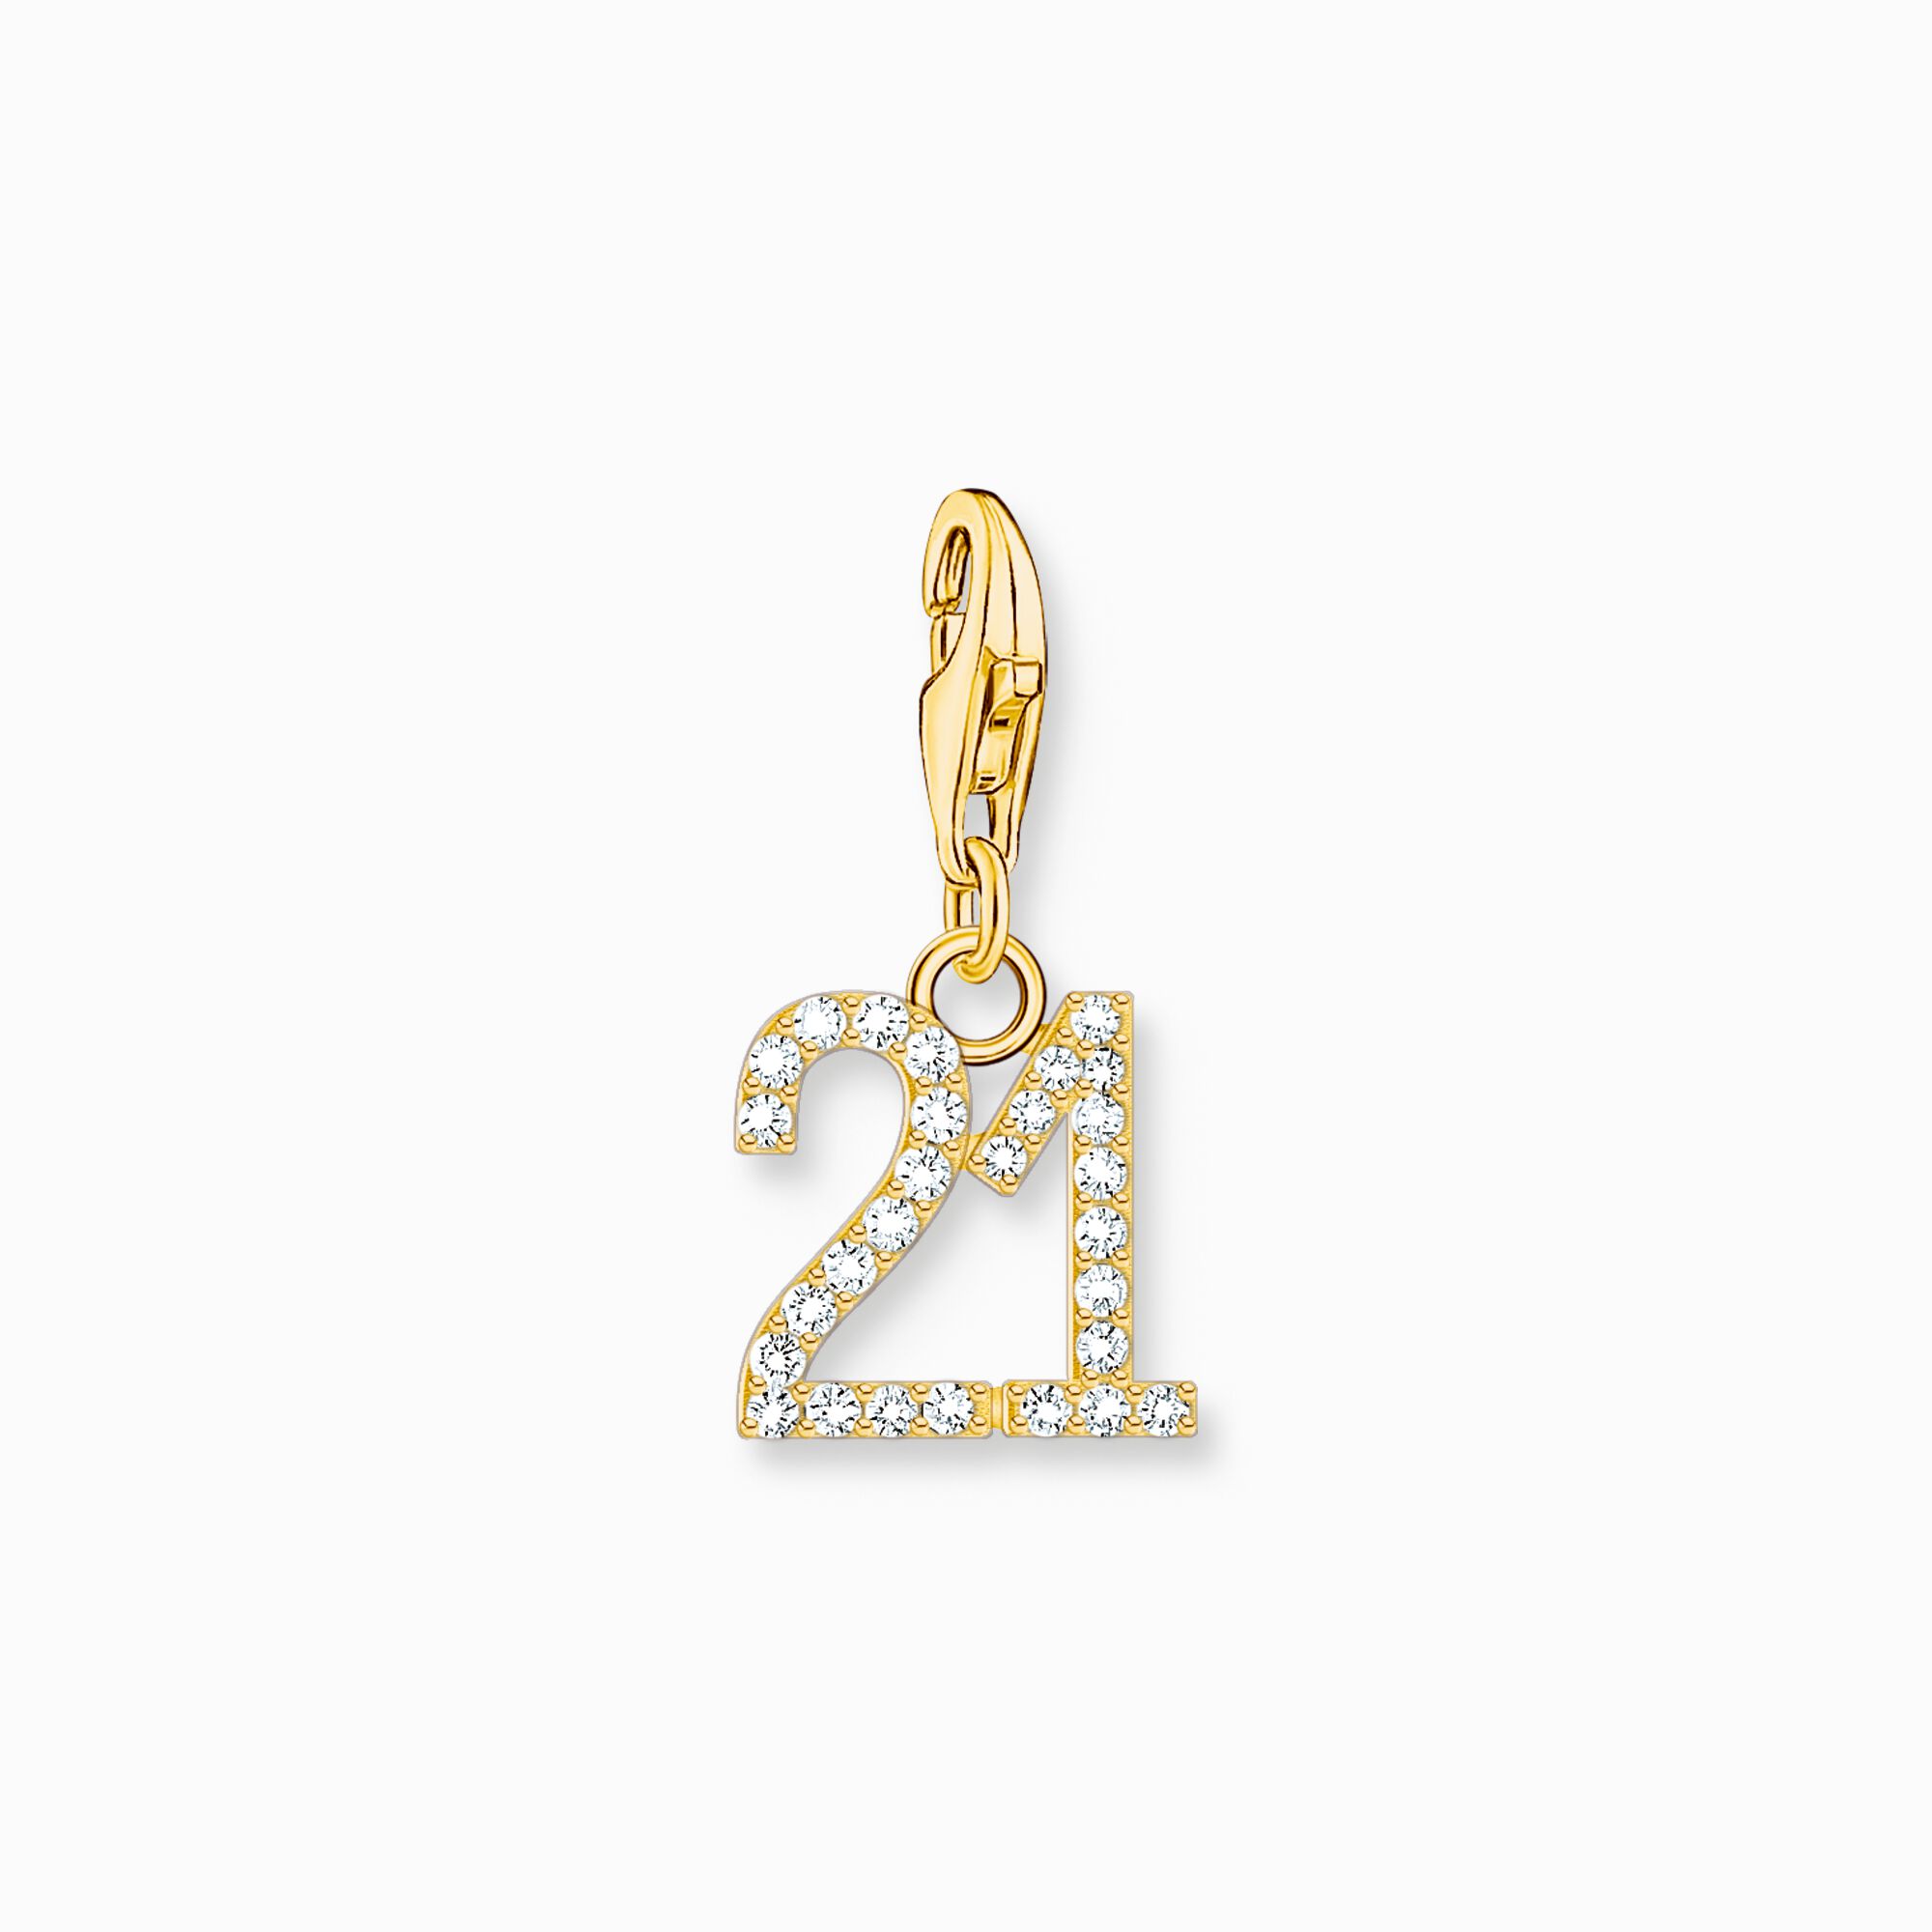 Gold-plated charm pendant number 21 with zirconia from the Charm Club collection in the THOMAS SABO online store